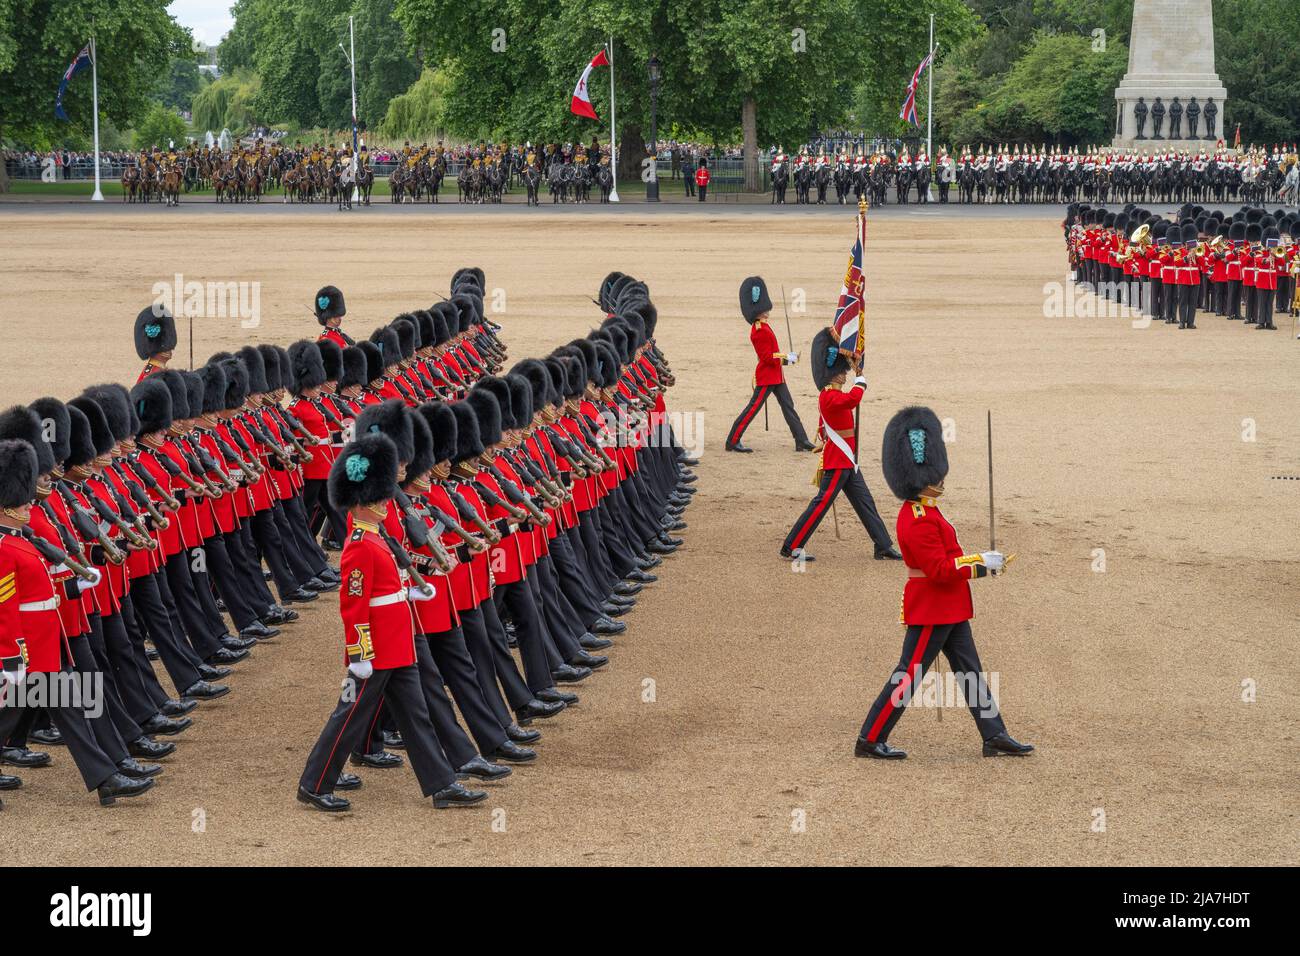 Horse Guards Parade, London, UK. 28 May 2022. The Colonel’s Review takes place, reviewed by HRH the Duke of Cambridge, and is the final rehearsal for Trooping the Colour which will take place on a weekday - Thursday 2nd June - for the Platinum Jubilee year. This year, the honour of trooping their colour falls to the Irish Guards and as Colonel of the regiment the Duke leads the final review. Credit: Malcolm Park/Alamy Live News Stock Photo